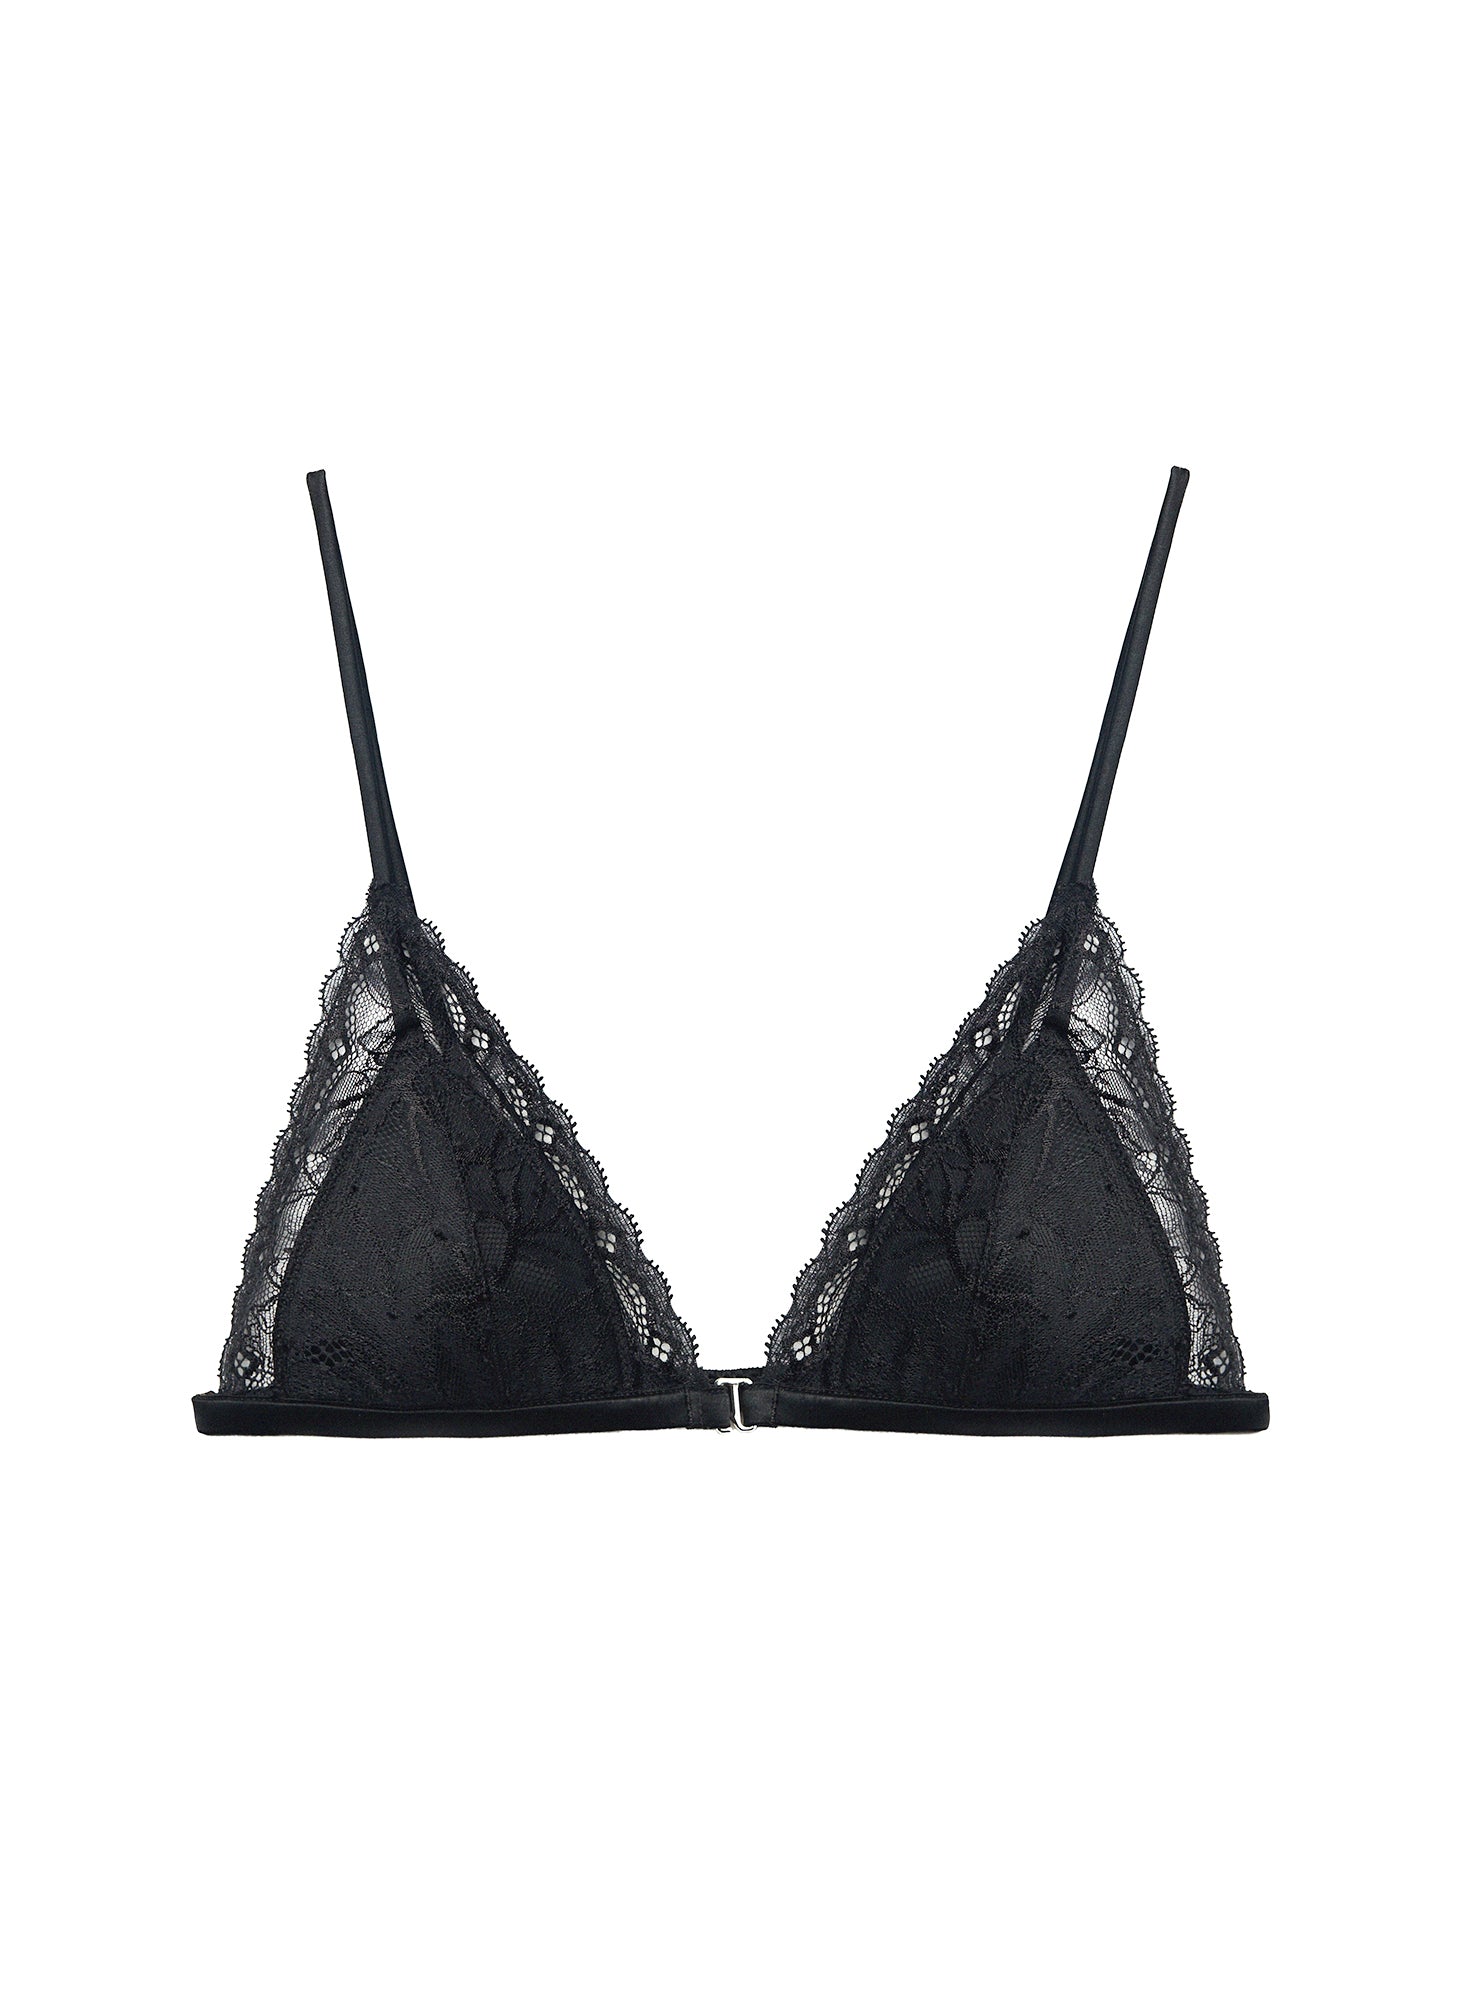 Girofle Lace Triangle Bralette